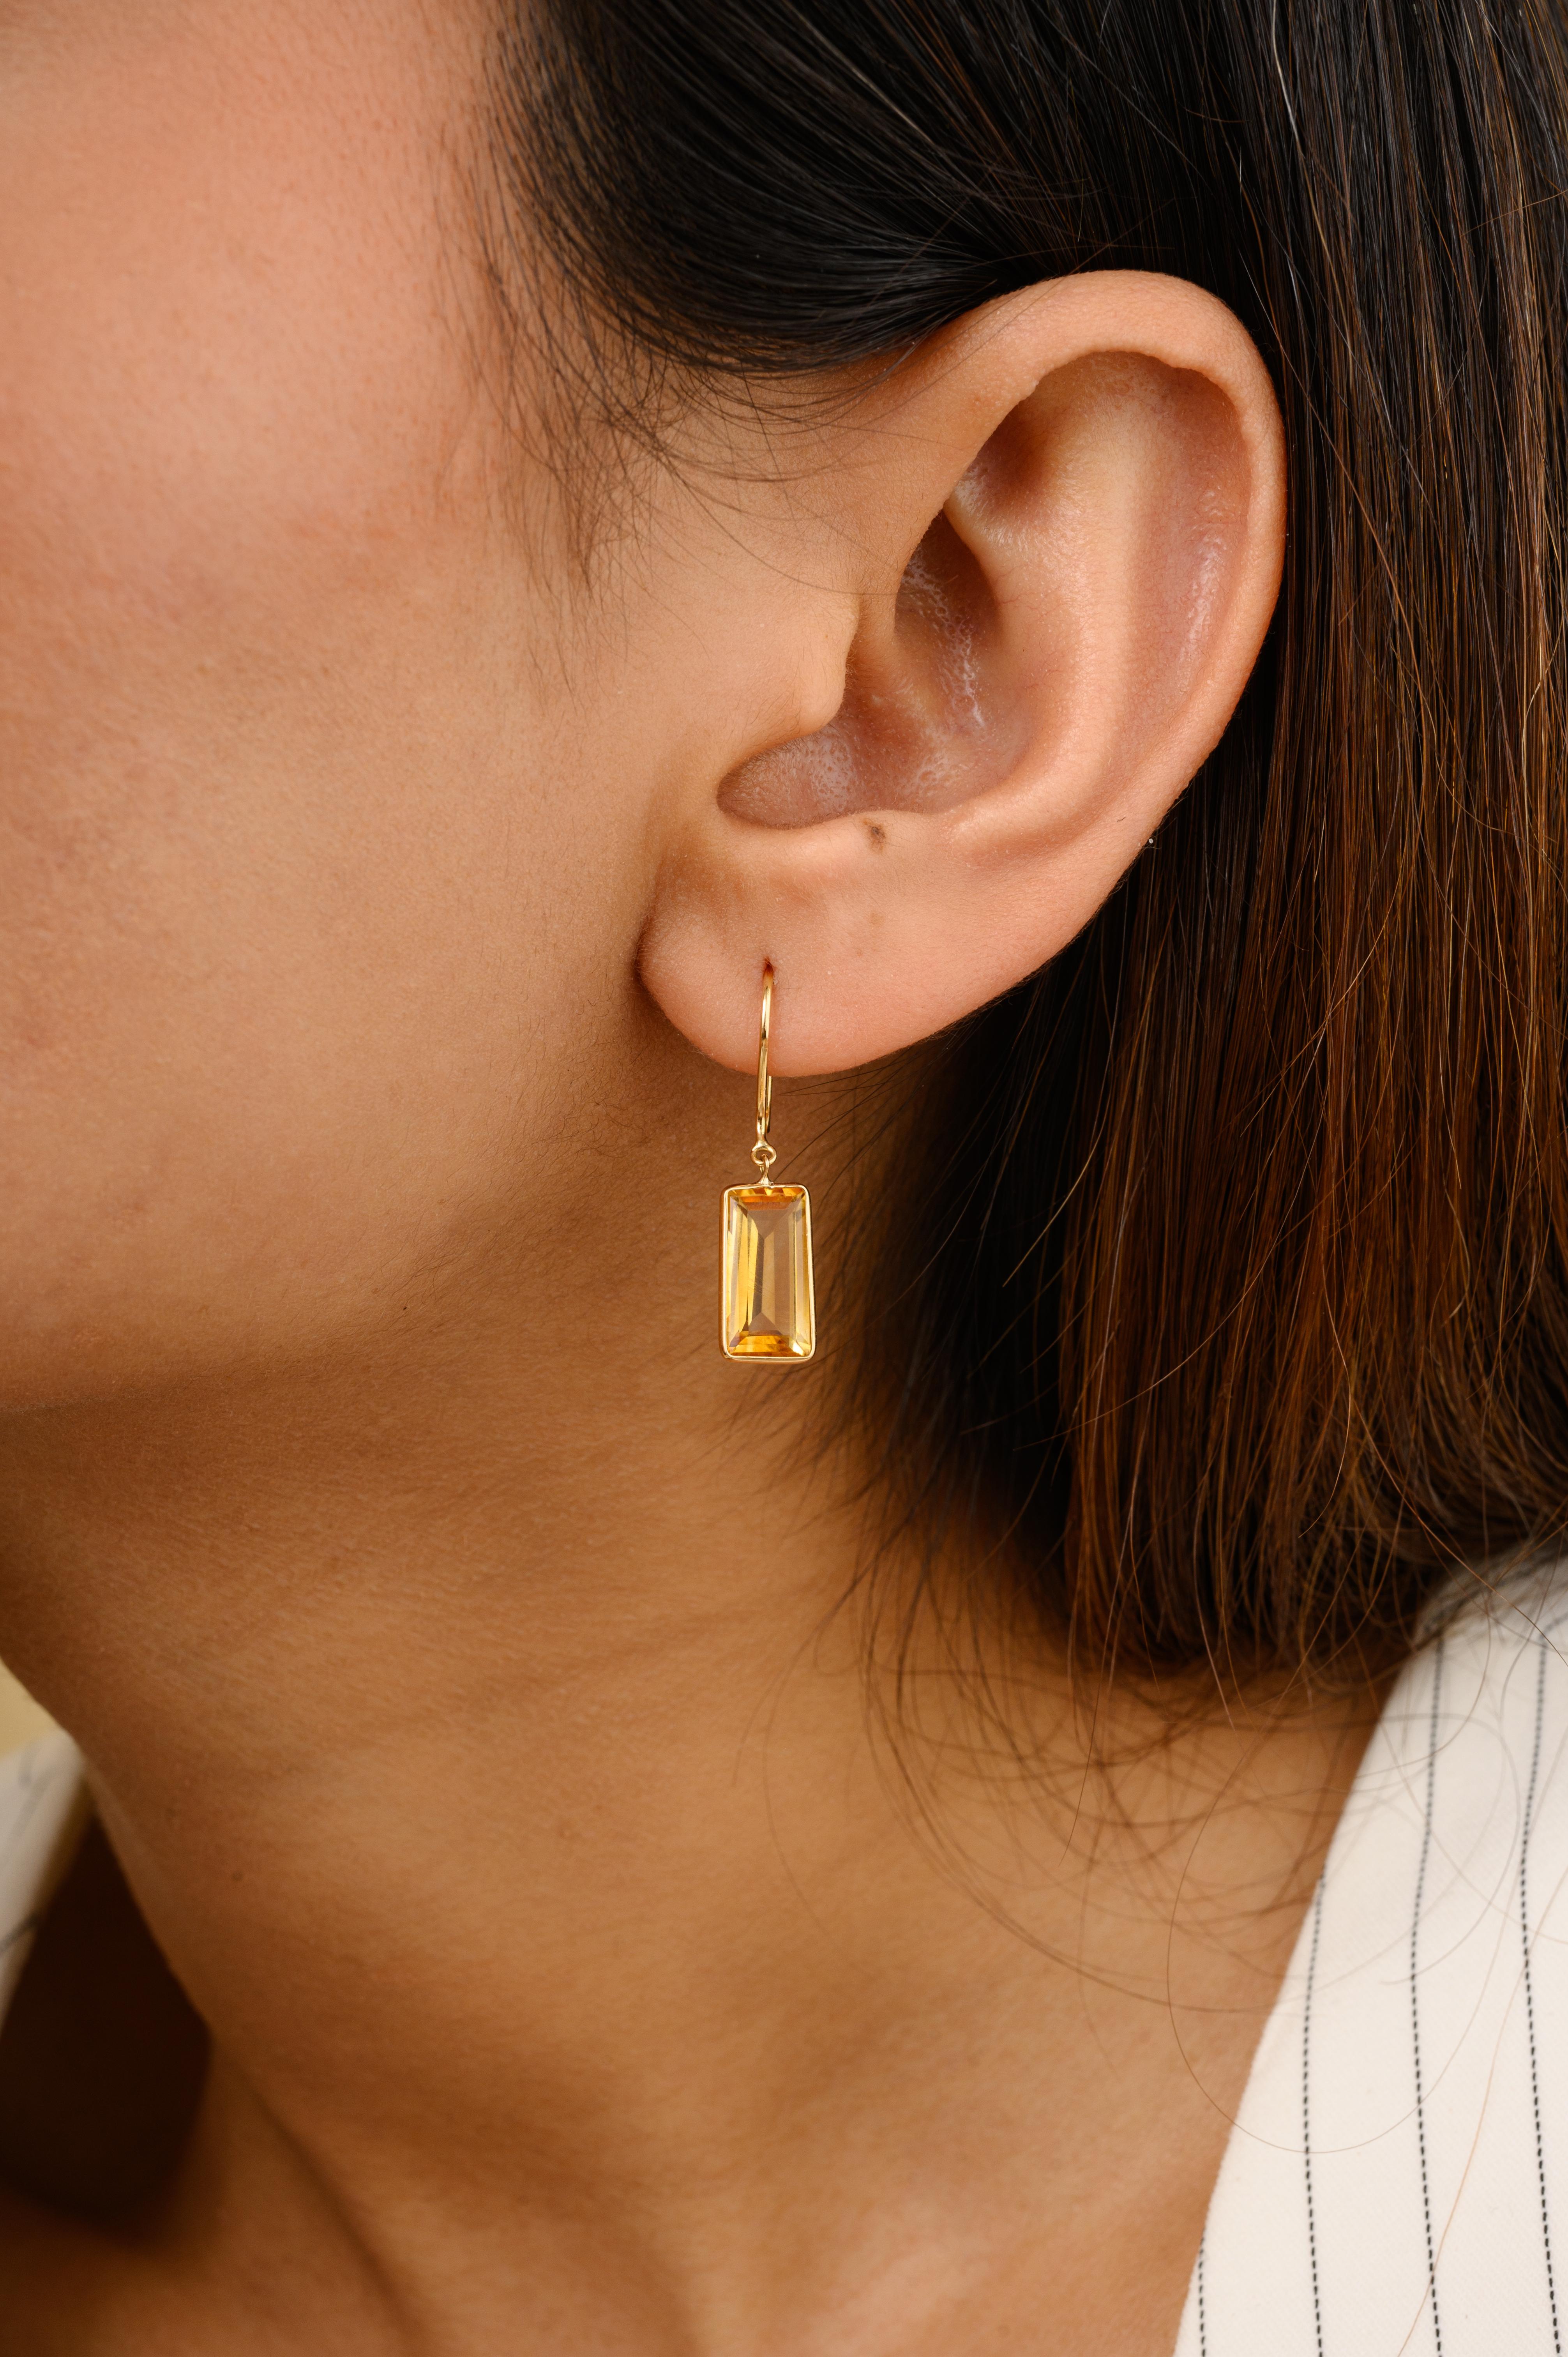 Baguette Citrine Everyday Drop Earrings Gift for Mom in 18K Gold to make a statement with your look. You shall need drop earrings to make a statement with your look. These earrings create a sparkling, luxurious look featuring baguette cut